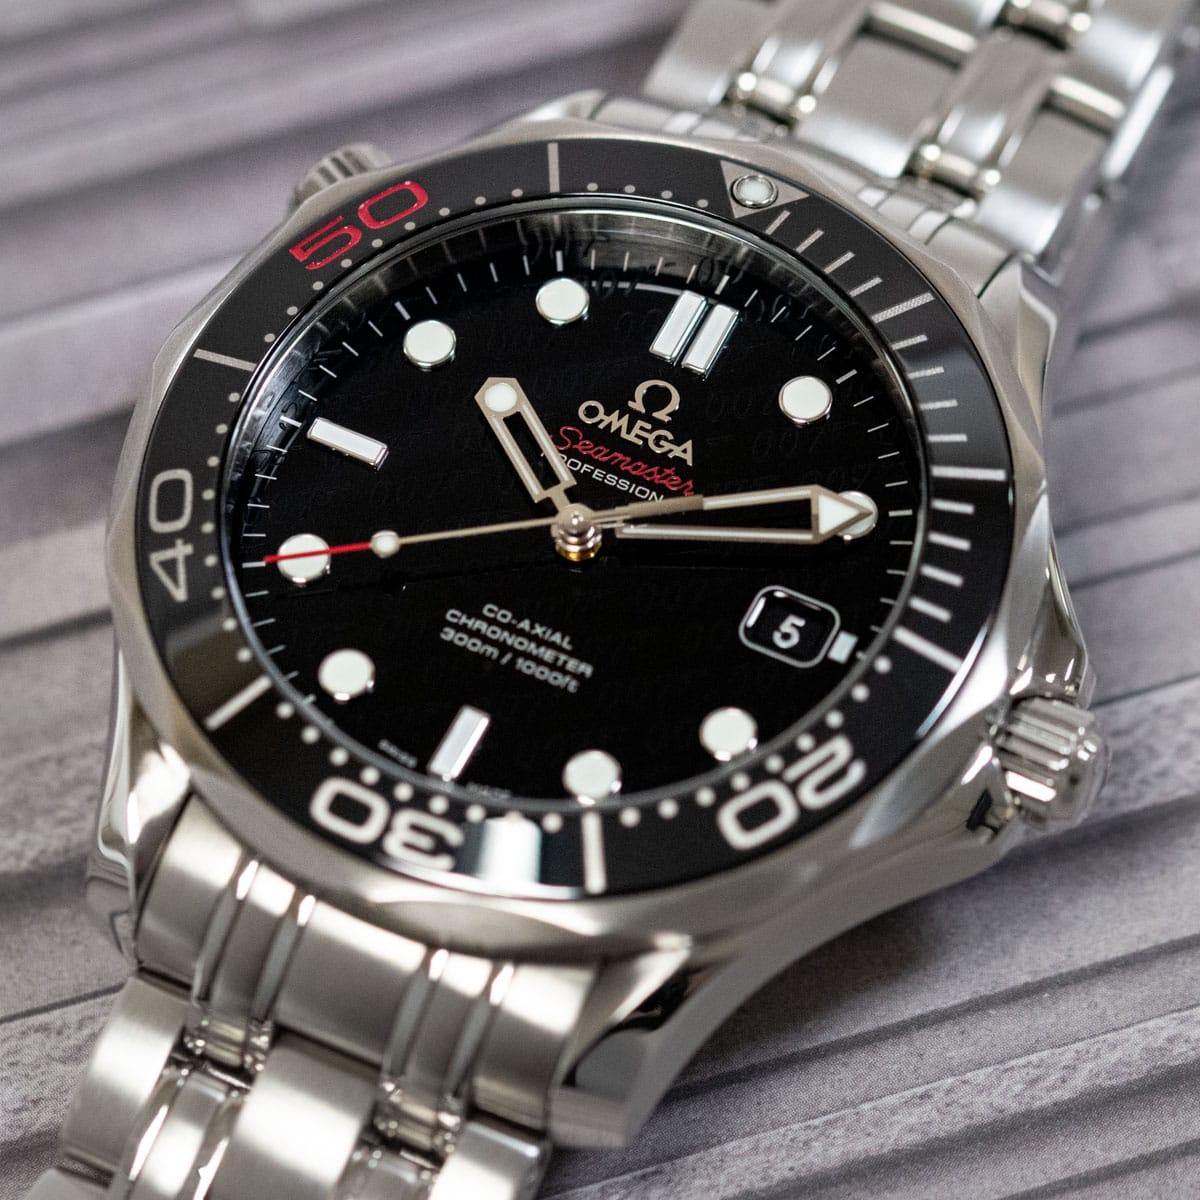 Extra Shot of Seamaster Professional James Bond 50th Anniversary Limited Edition